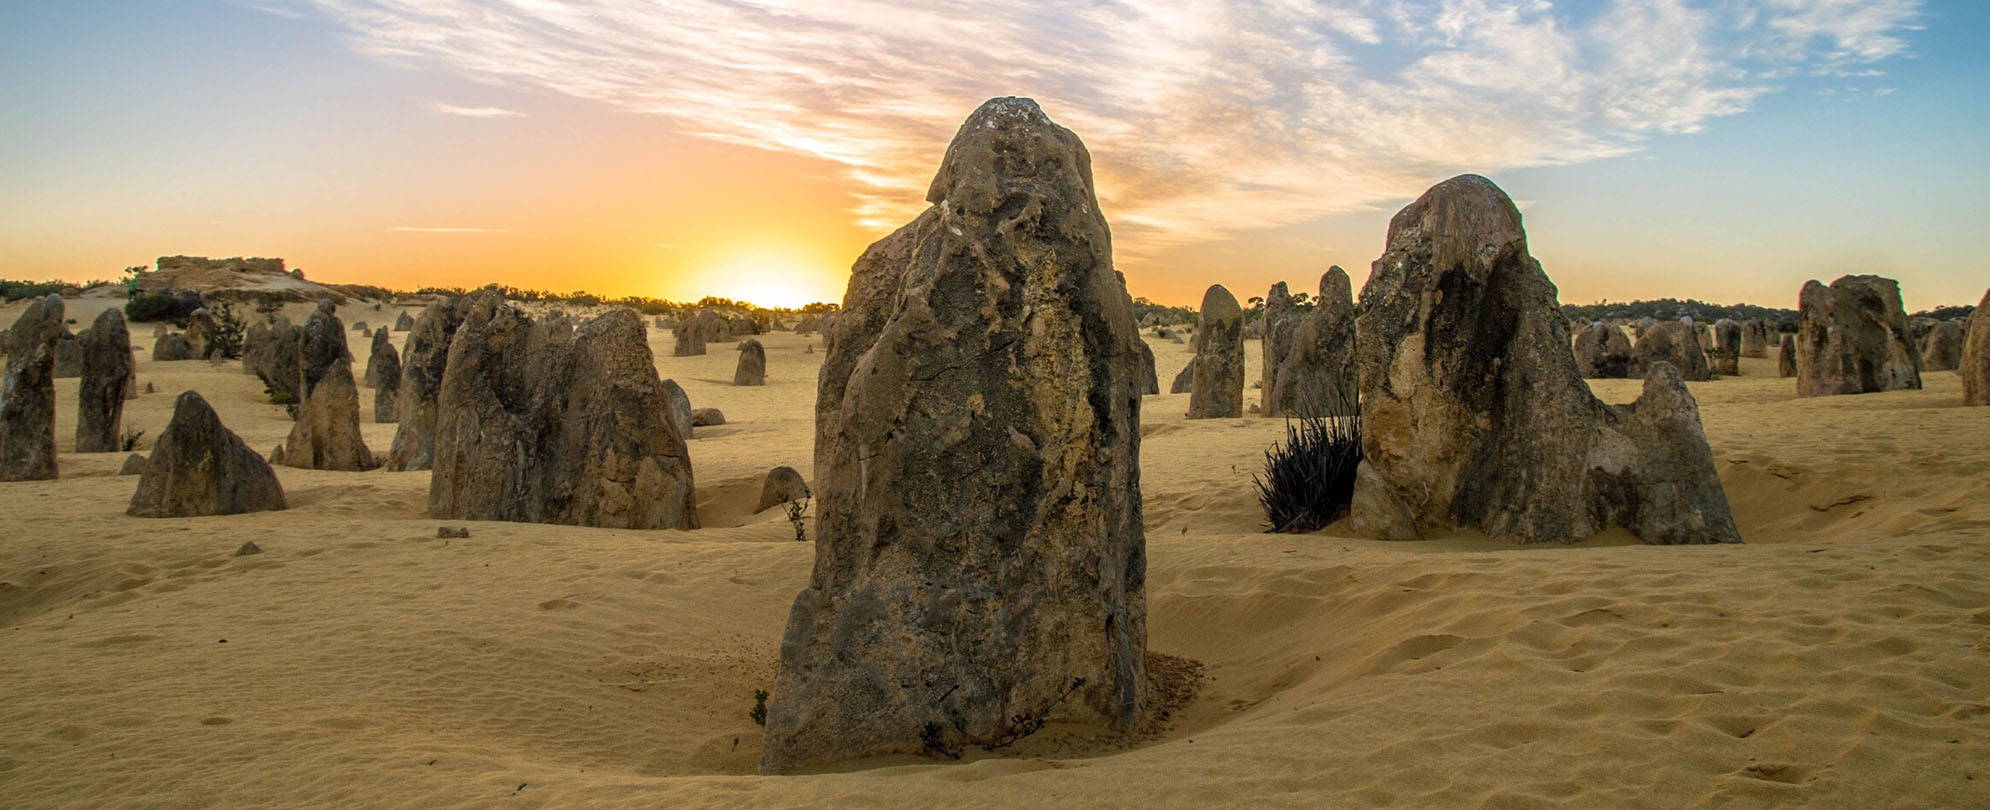 The sun sets on large rock formations in the sand at Pinnacles National Park in California.